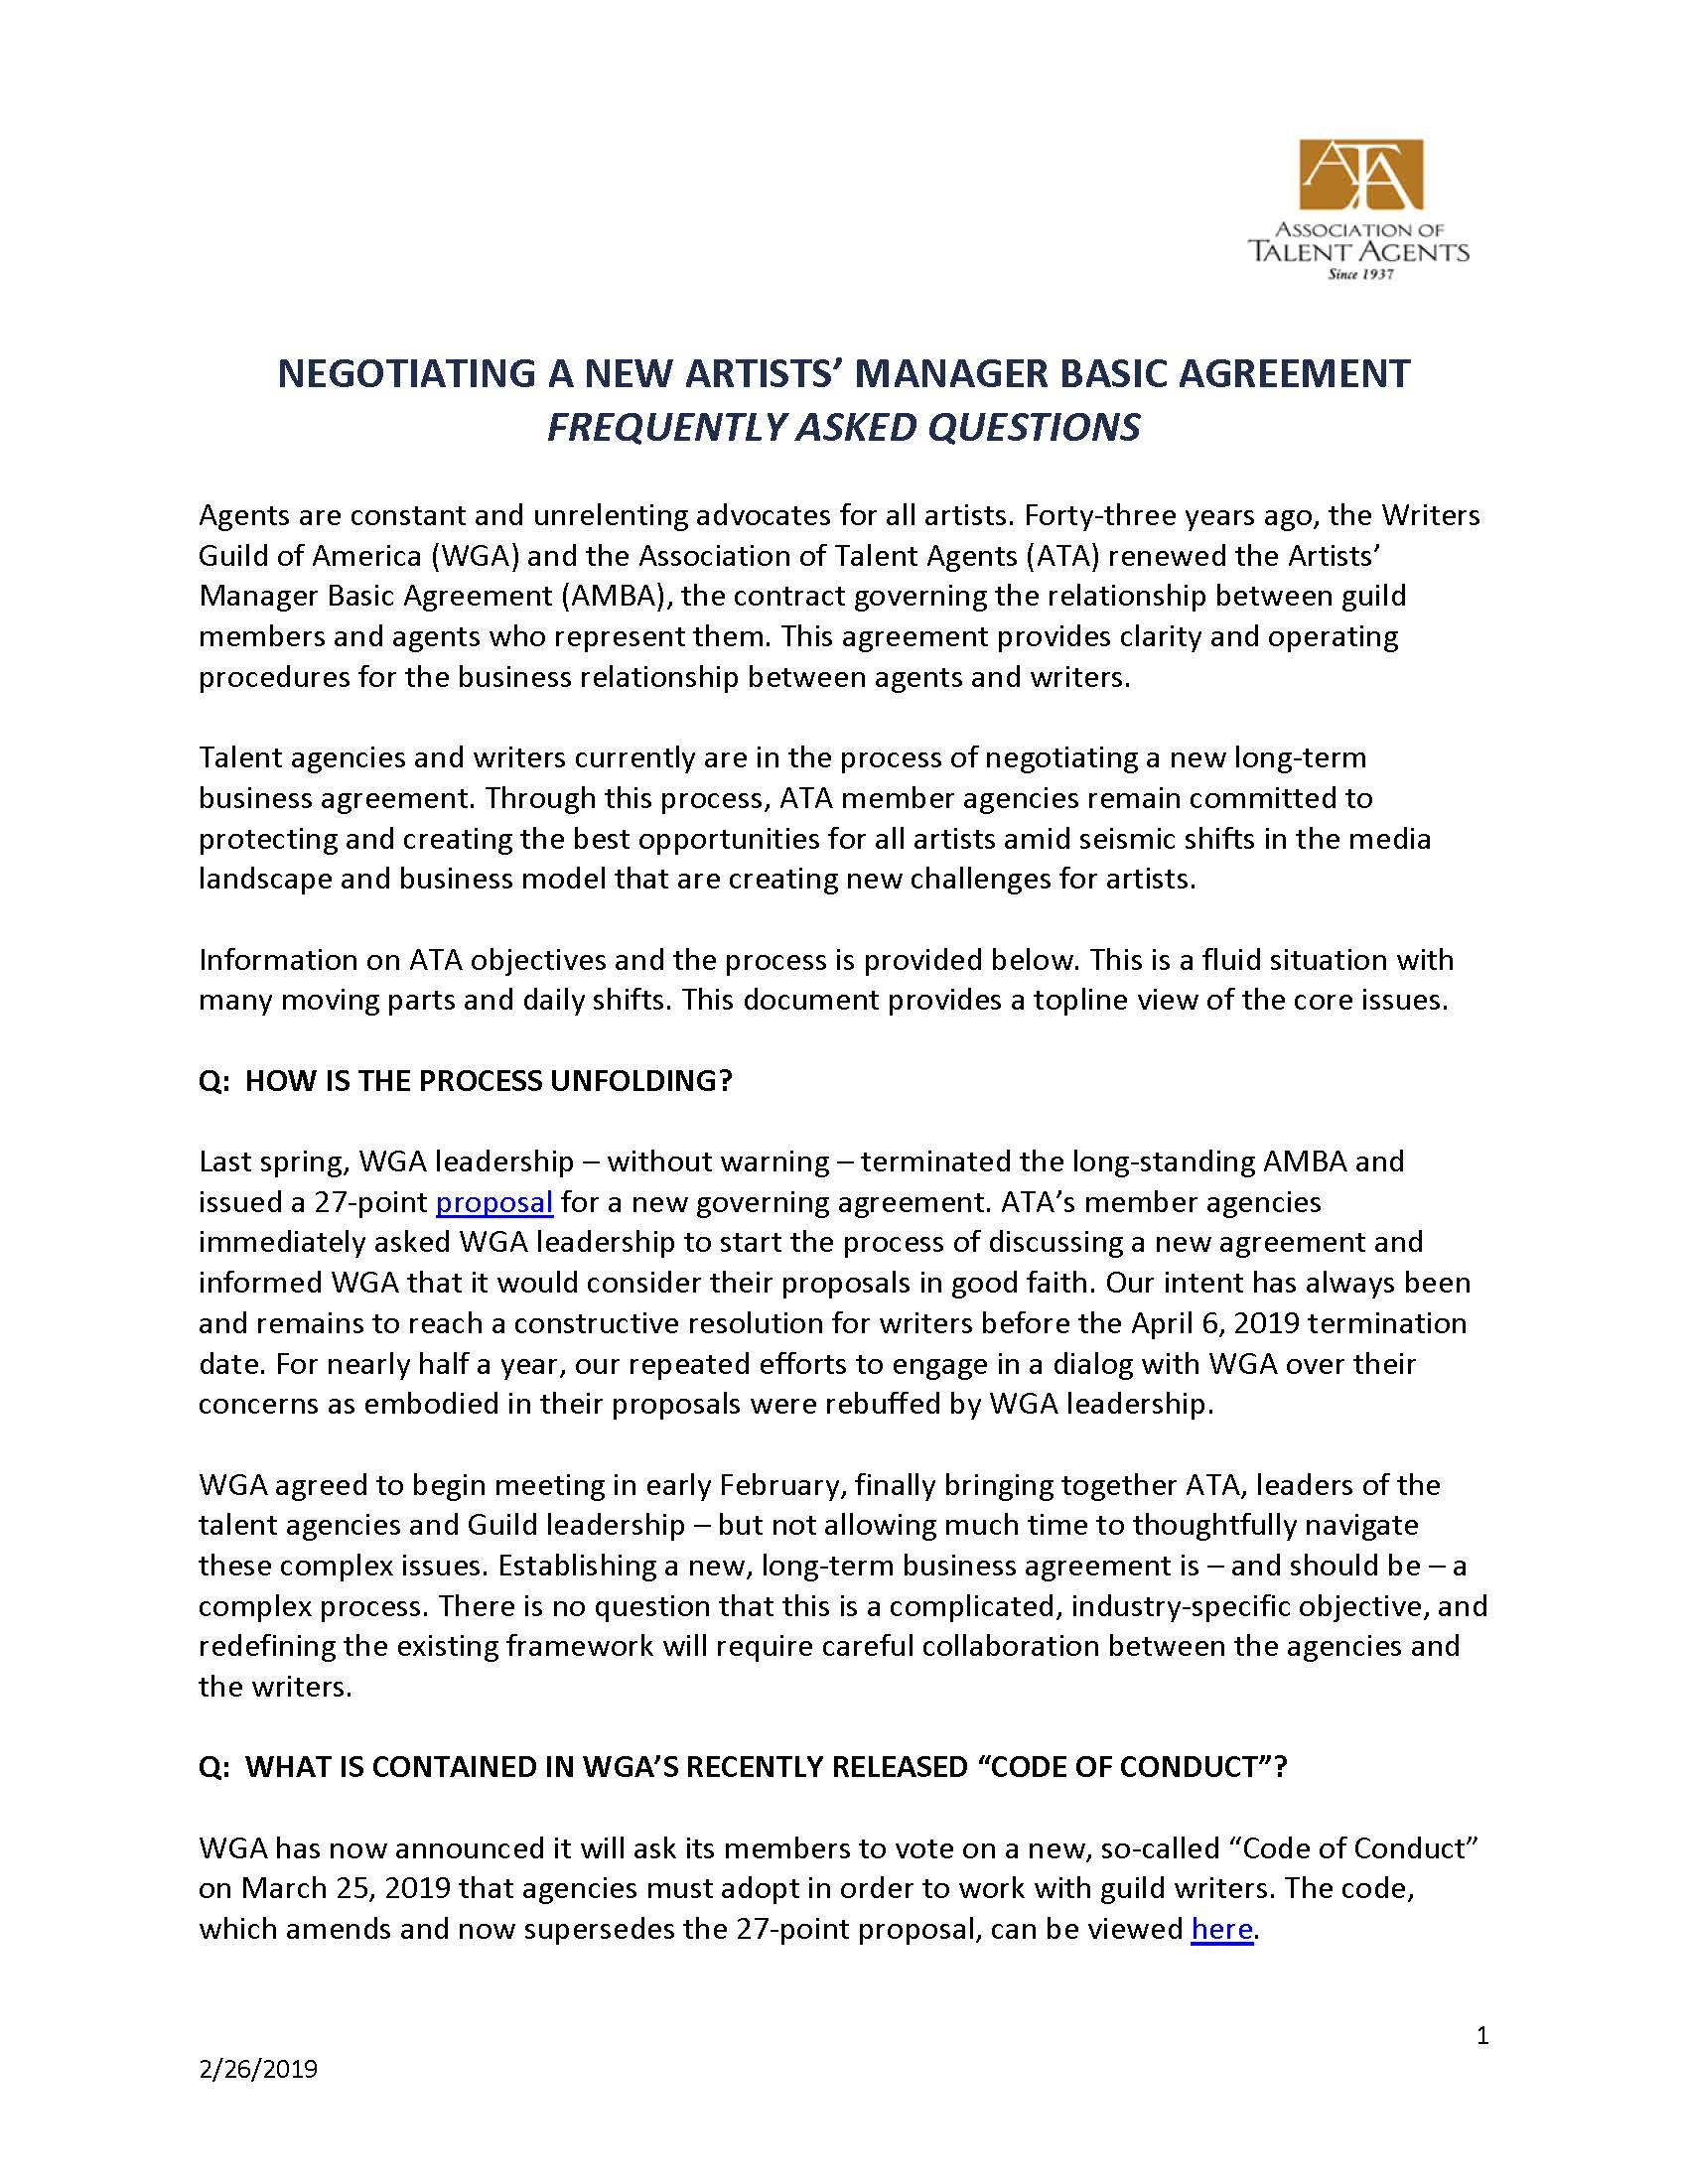 Wga Basic Agreement Association Of Talent Agents 2019 Artists Manager Basic Agreement